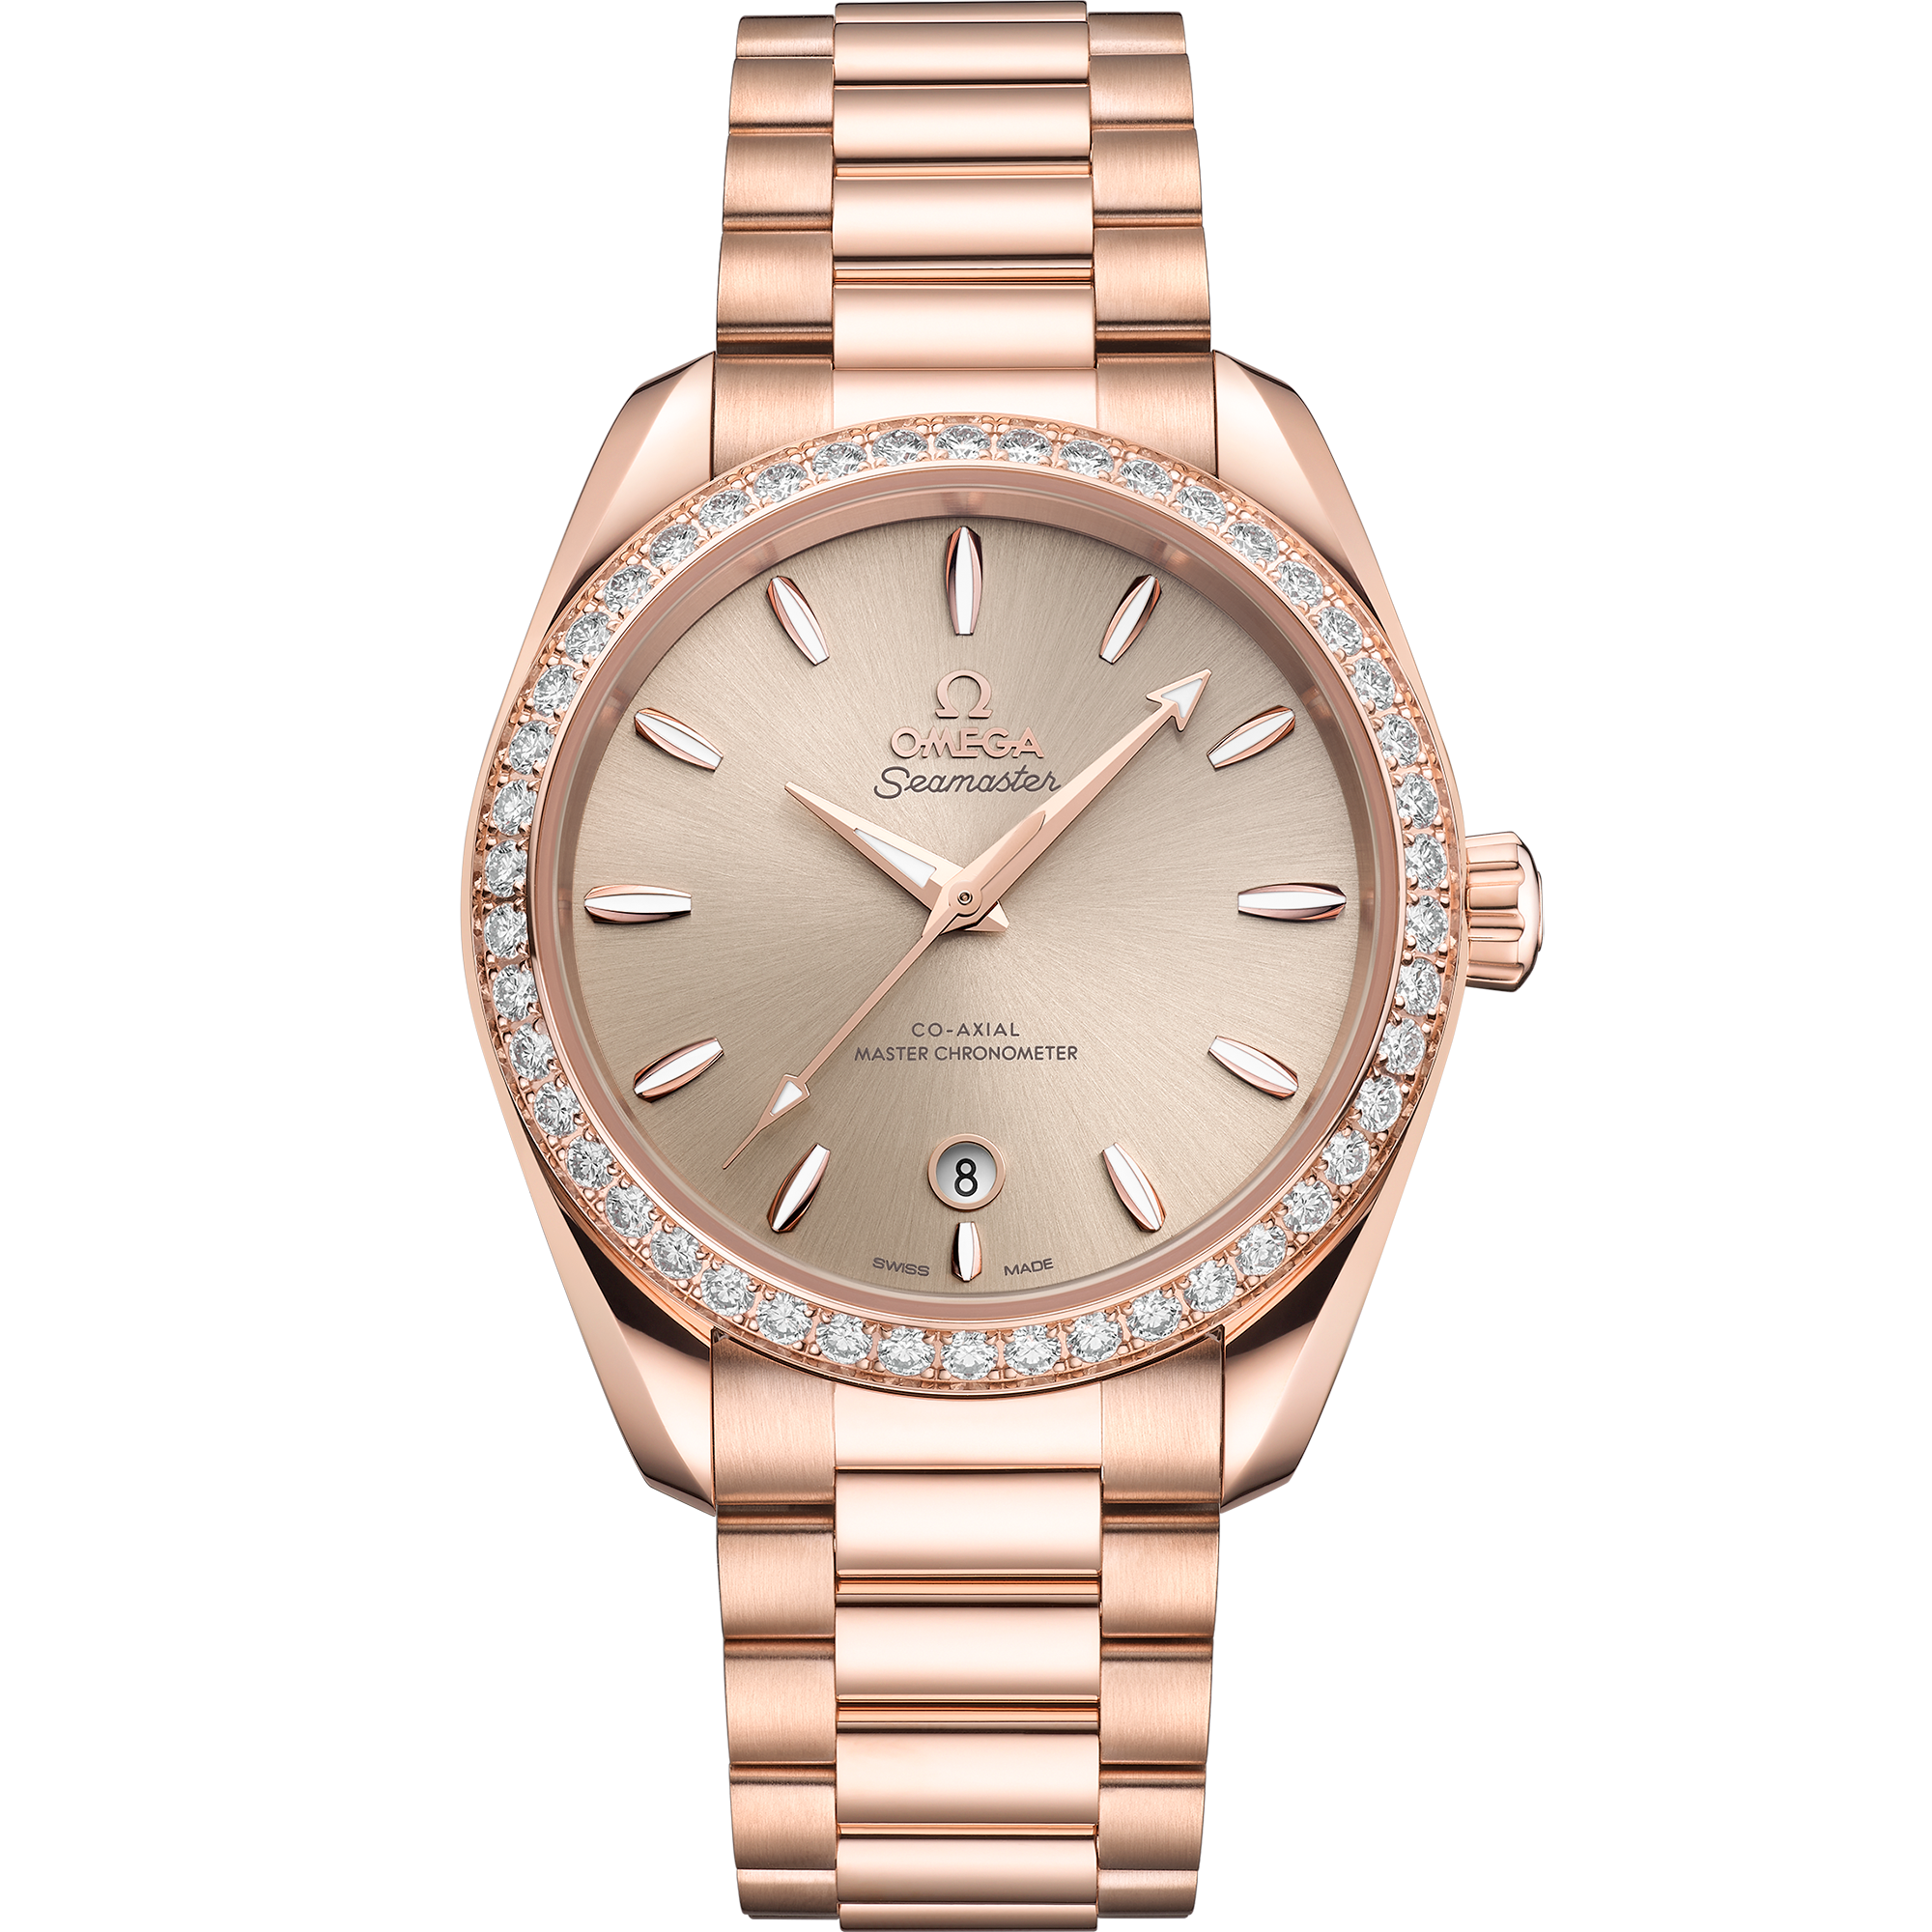 Seamaster 38 mm, ouro Sedna™ em ouro Sedna™ - 220.55.38.20.09.001